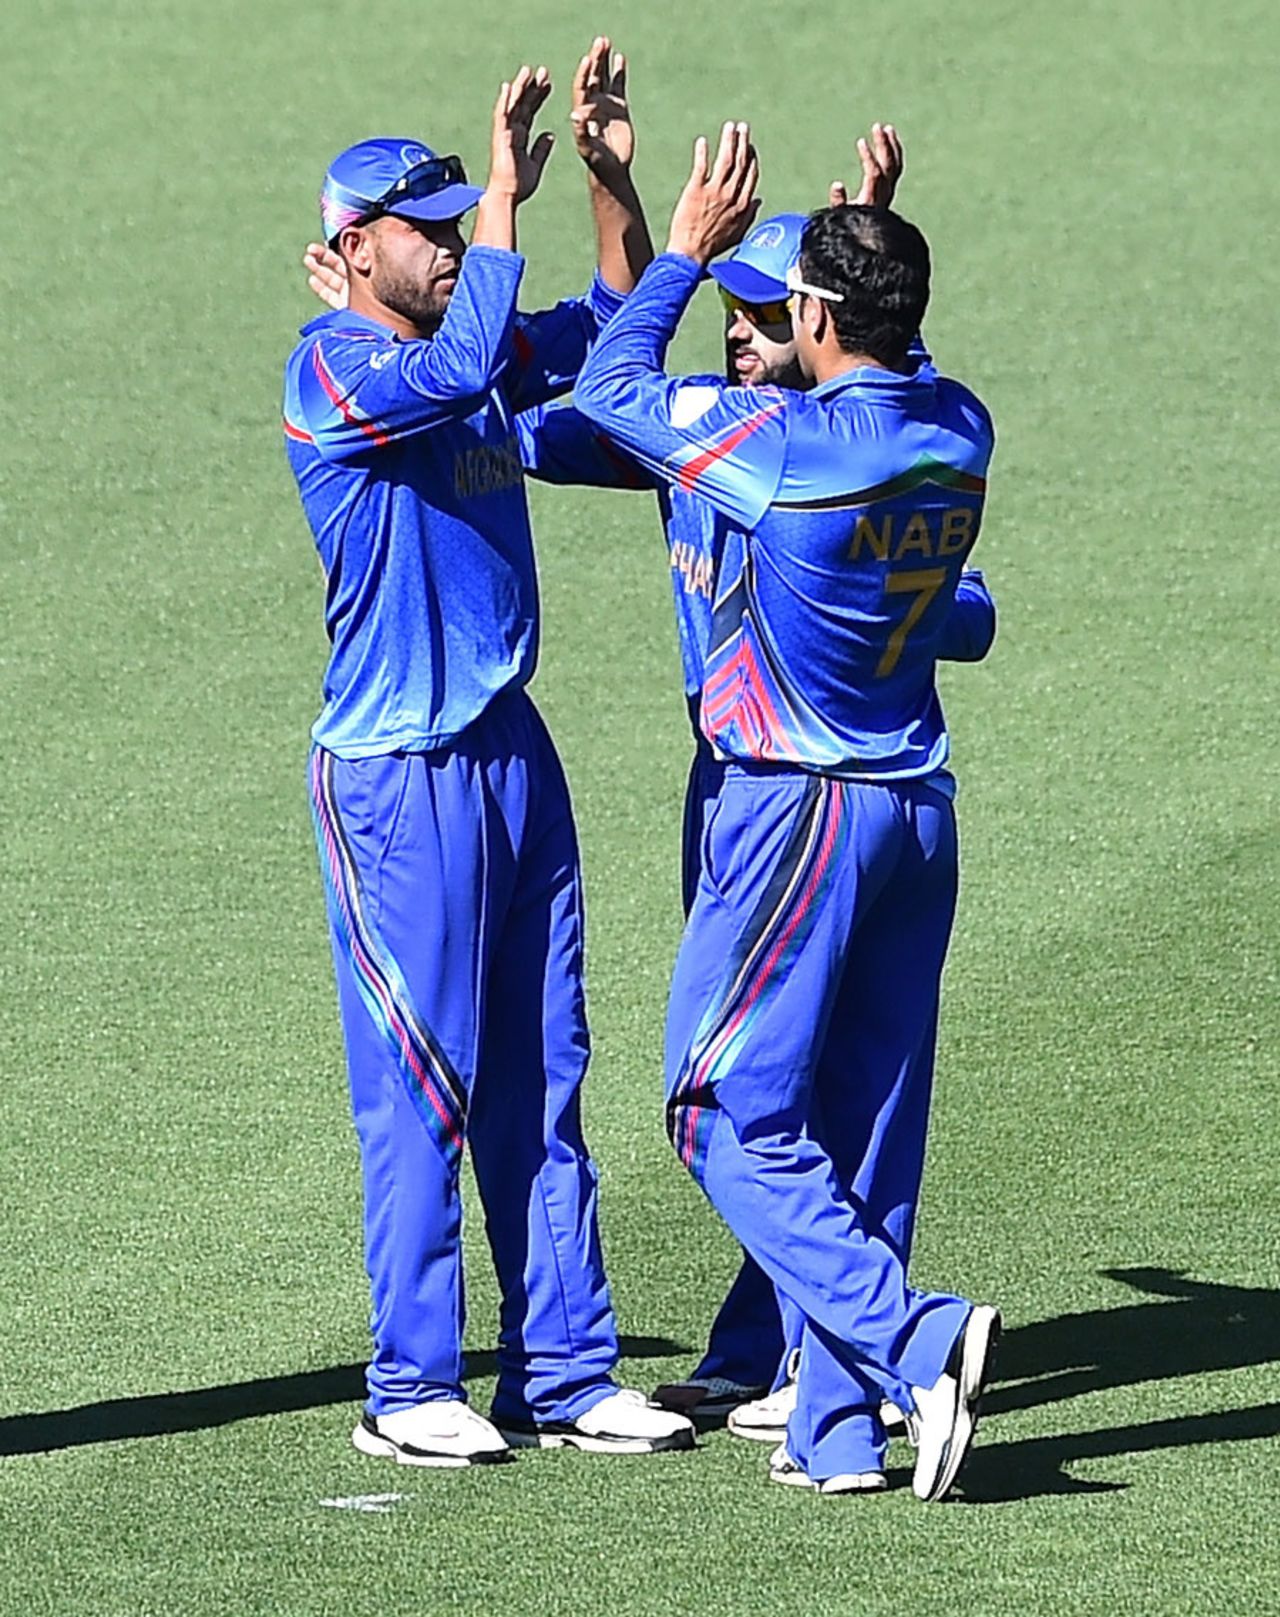 The Afghanistan players celebrate a wicket, Afghanistan v India, World Cup warm-ups, Adelaide, February 10, 2015